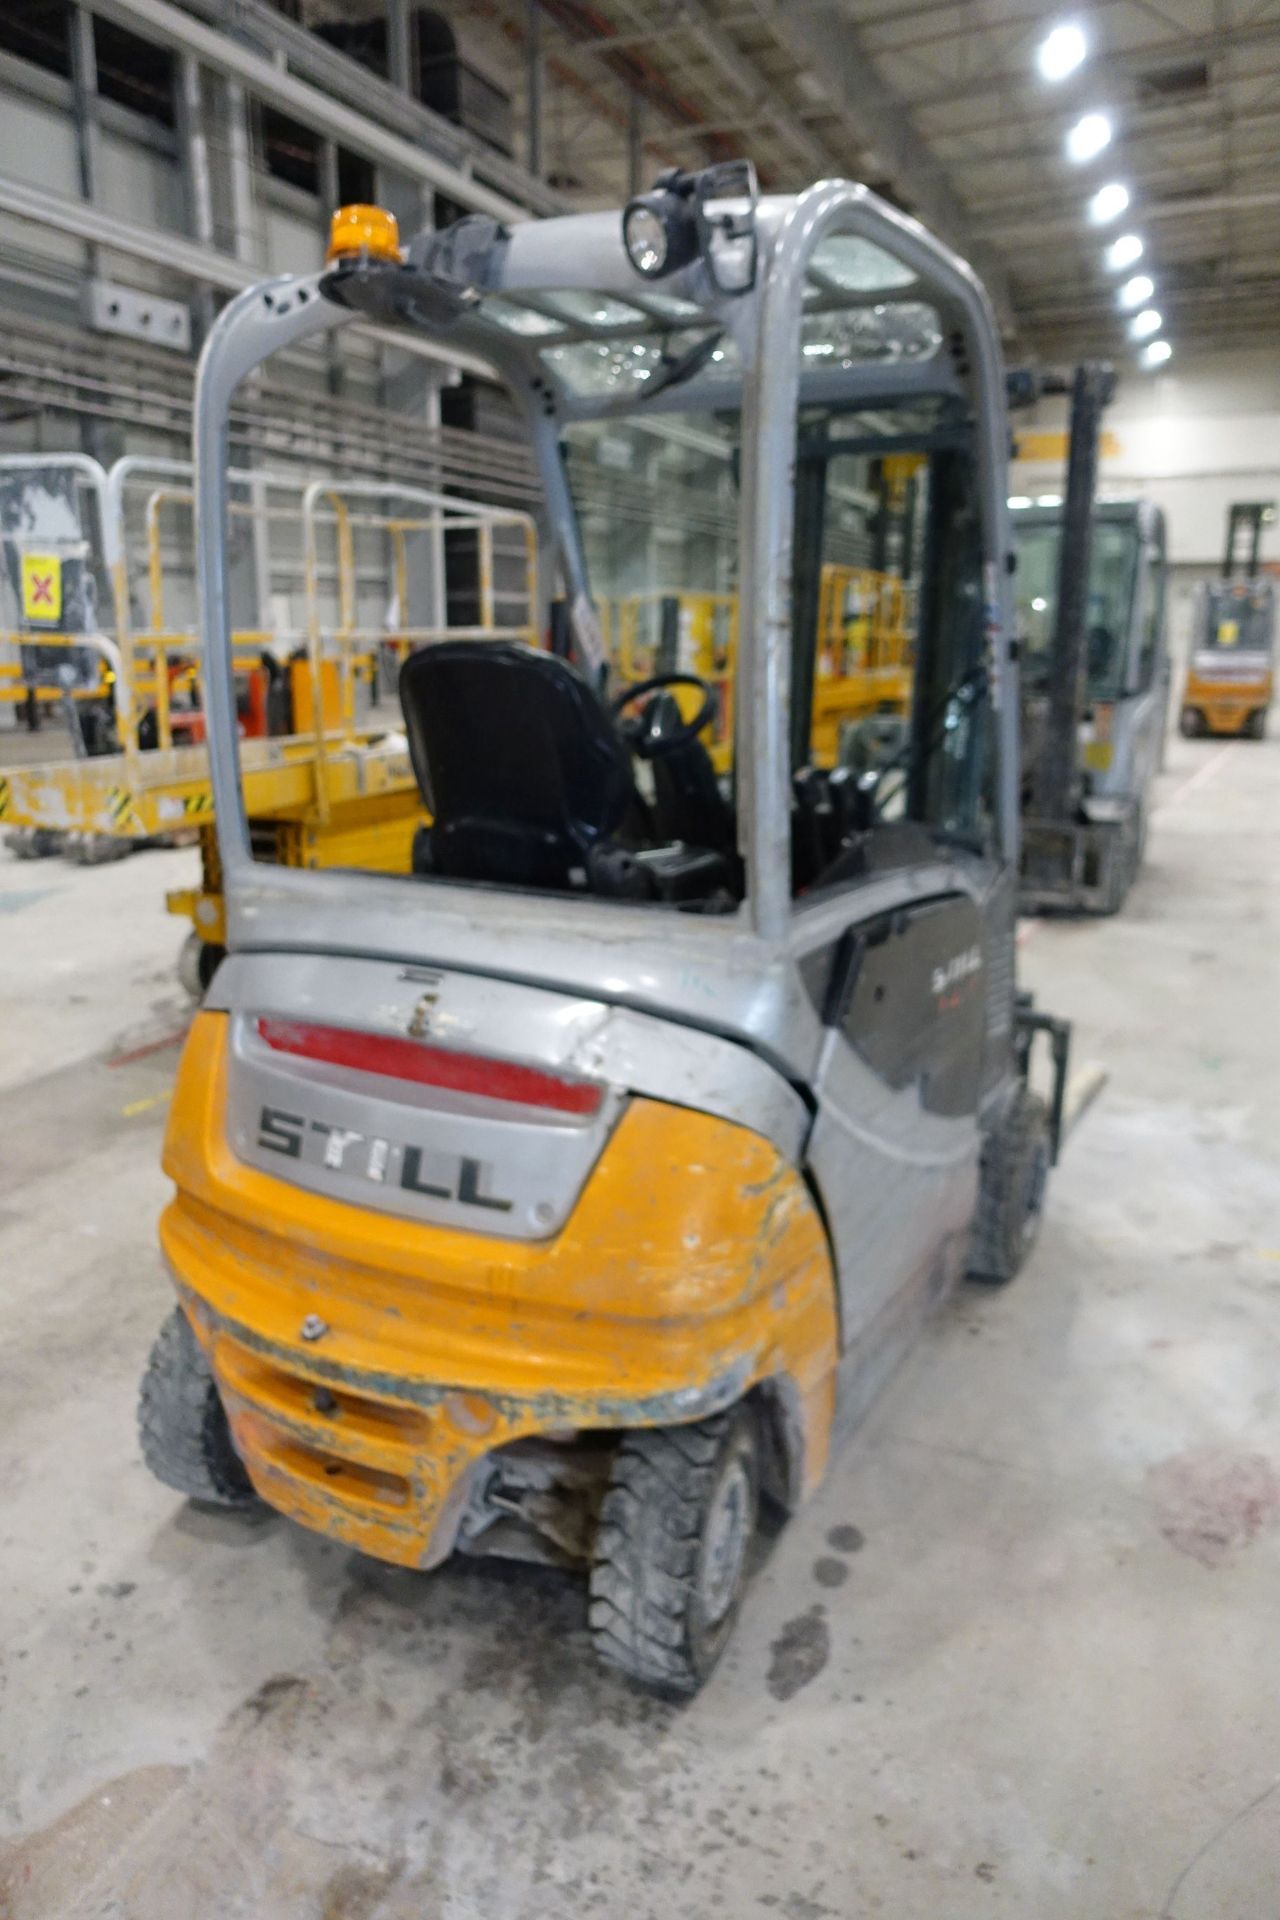 STILL RX20-20P Electric Forklift Truck, 2,000kg Capacity with Sideshift, Ser # 516216H00371 (2017) - Image 4 of 42